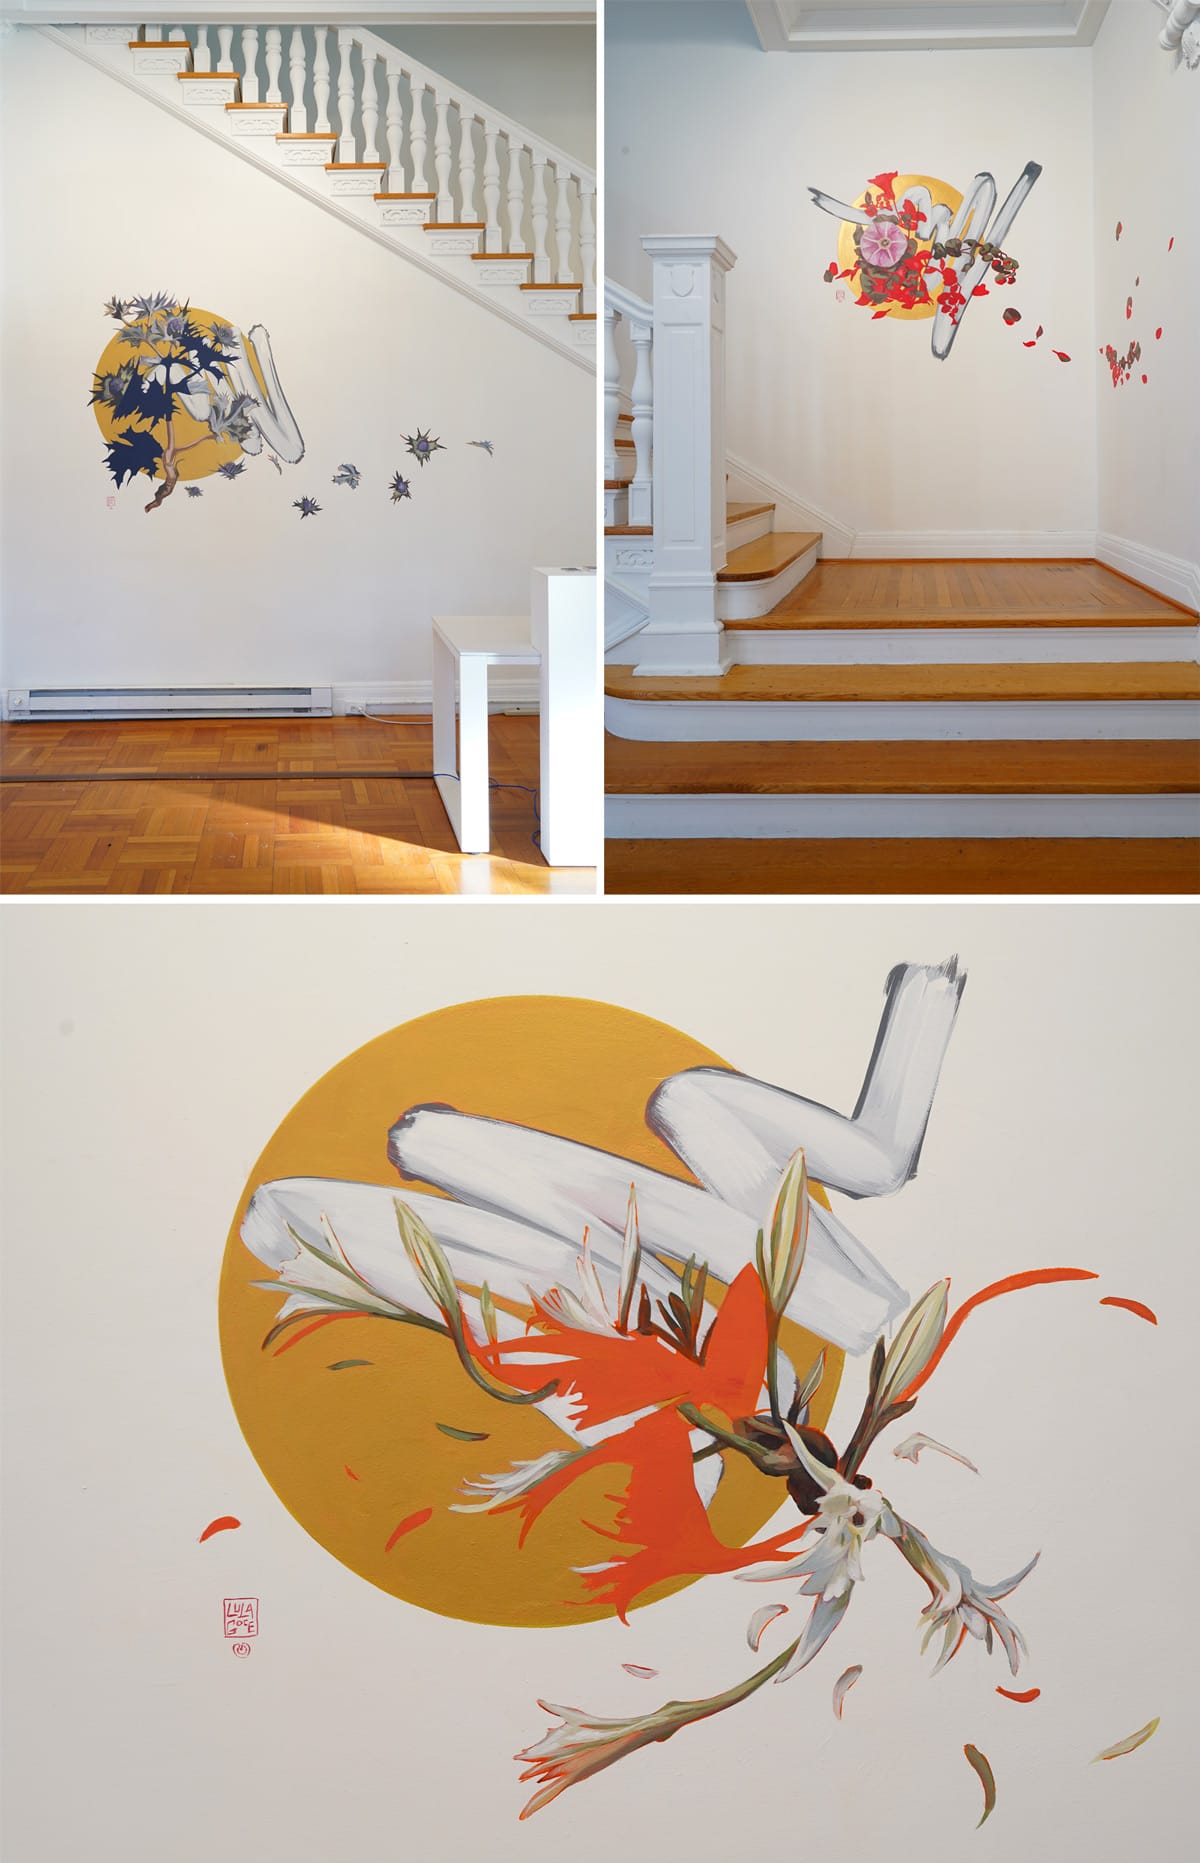 Collage of various drawings on the walls of the Embassy of Spain